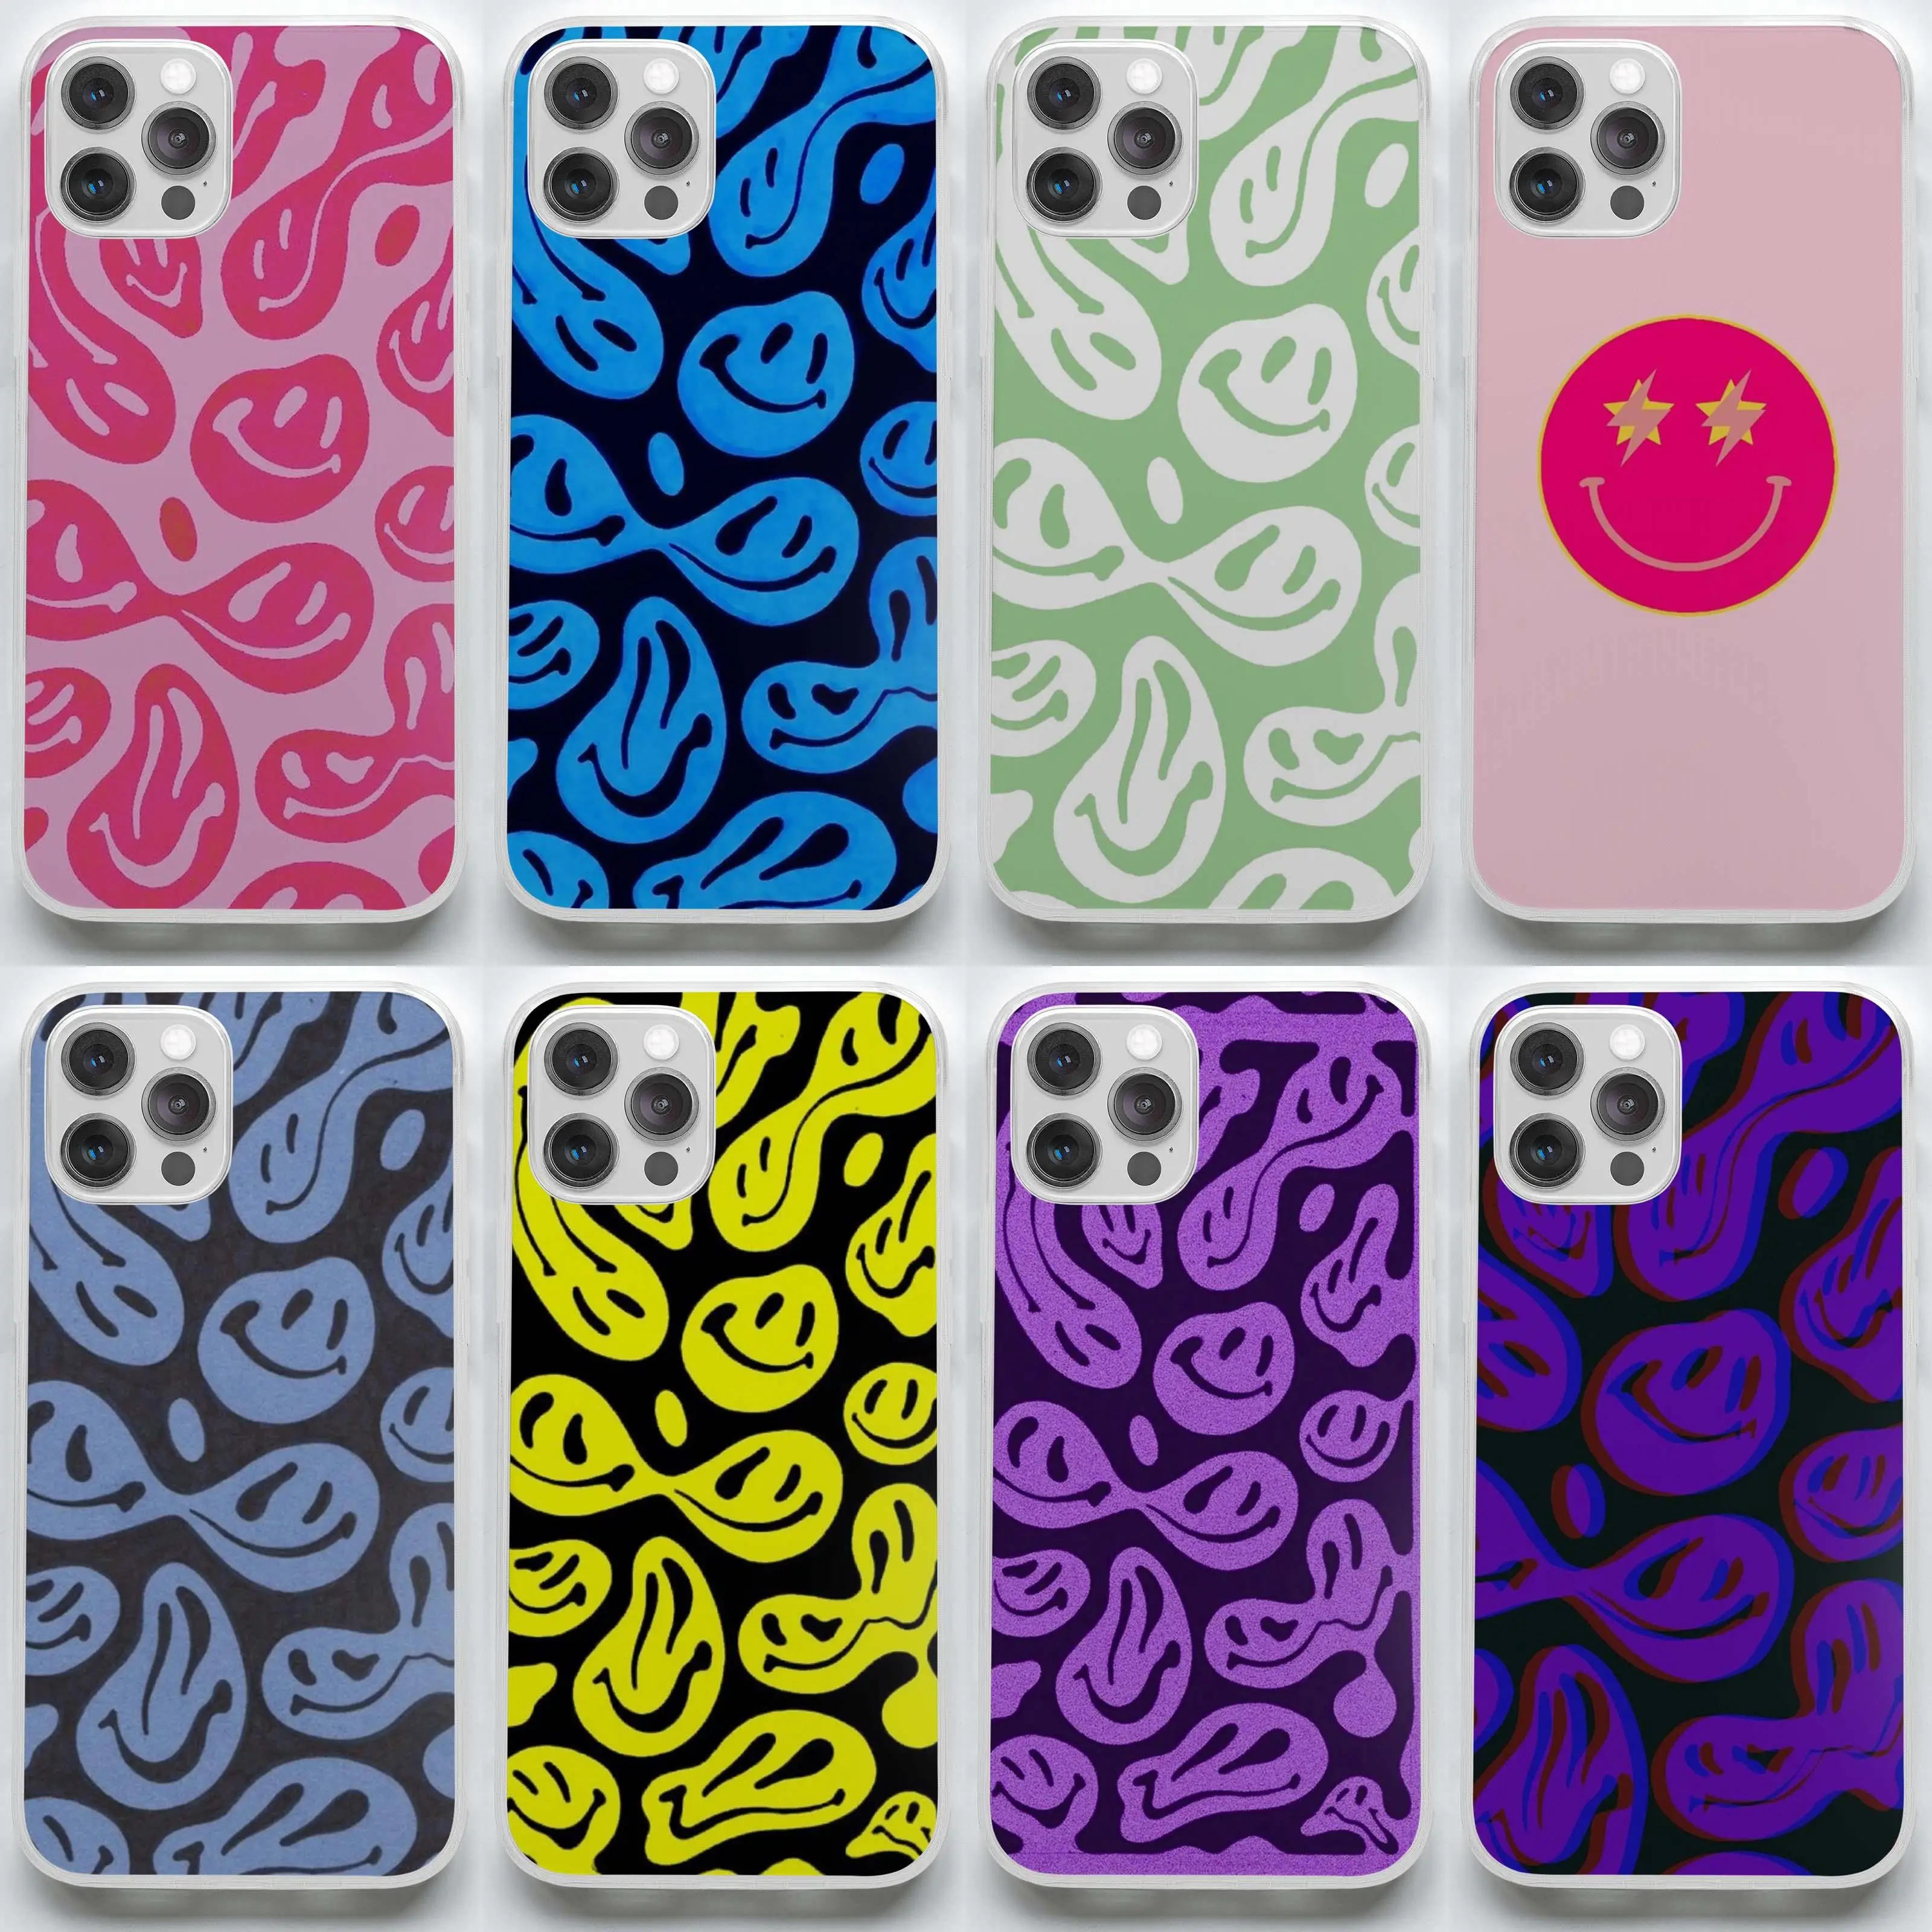 Smiley Face Hot Melted Psychedelic Pattern Soft Blue Phone Case for iPhone 7 8 Plus 11 12 13 Pro Max Mini X XS XR Max Dog